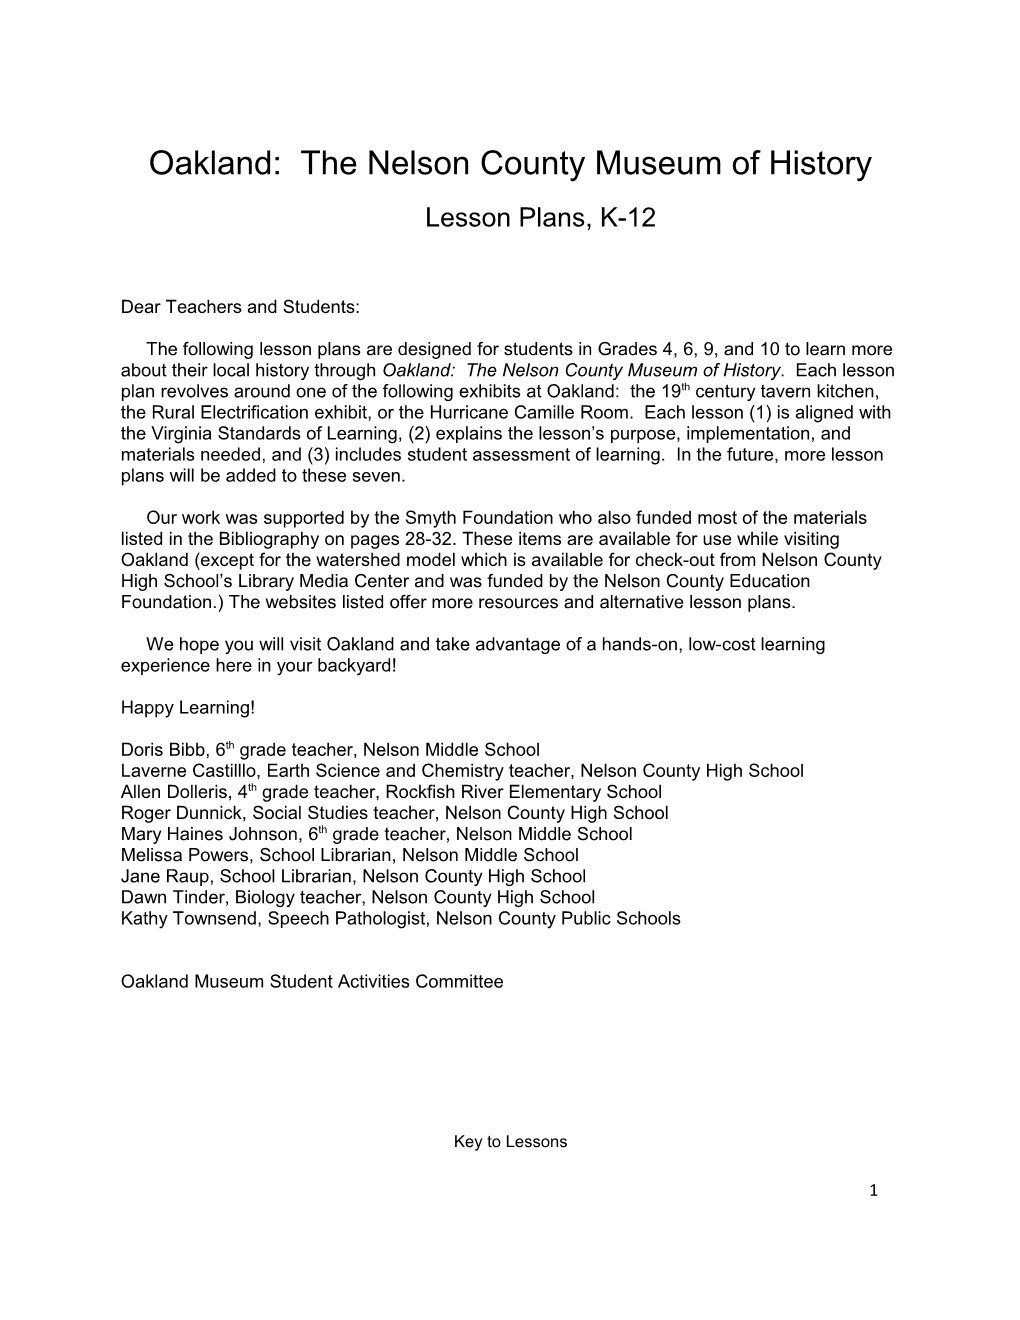 Oakland: the Nelson County Museum of History